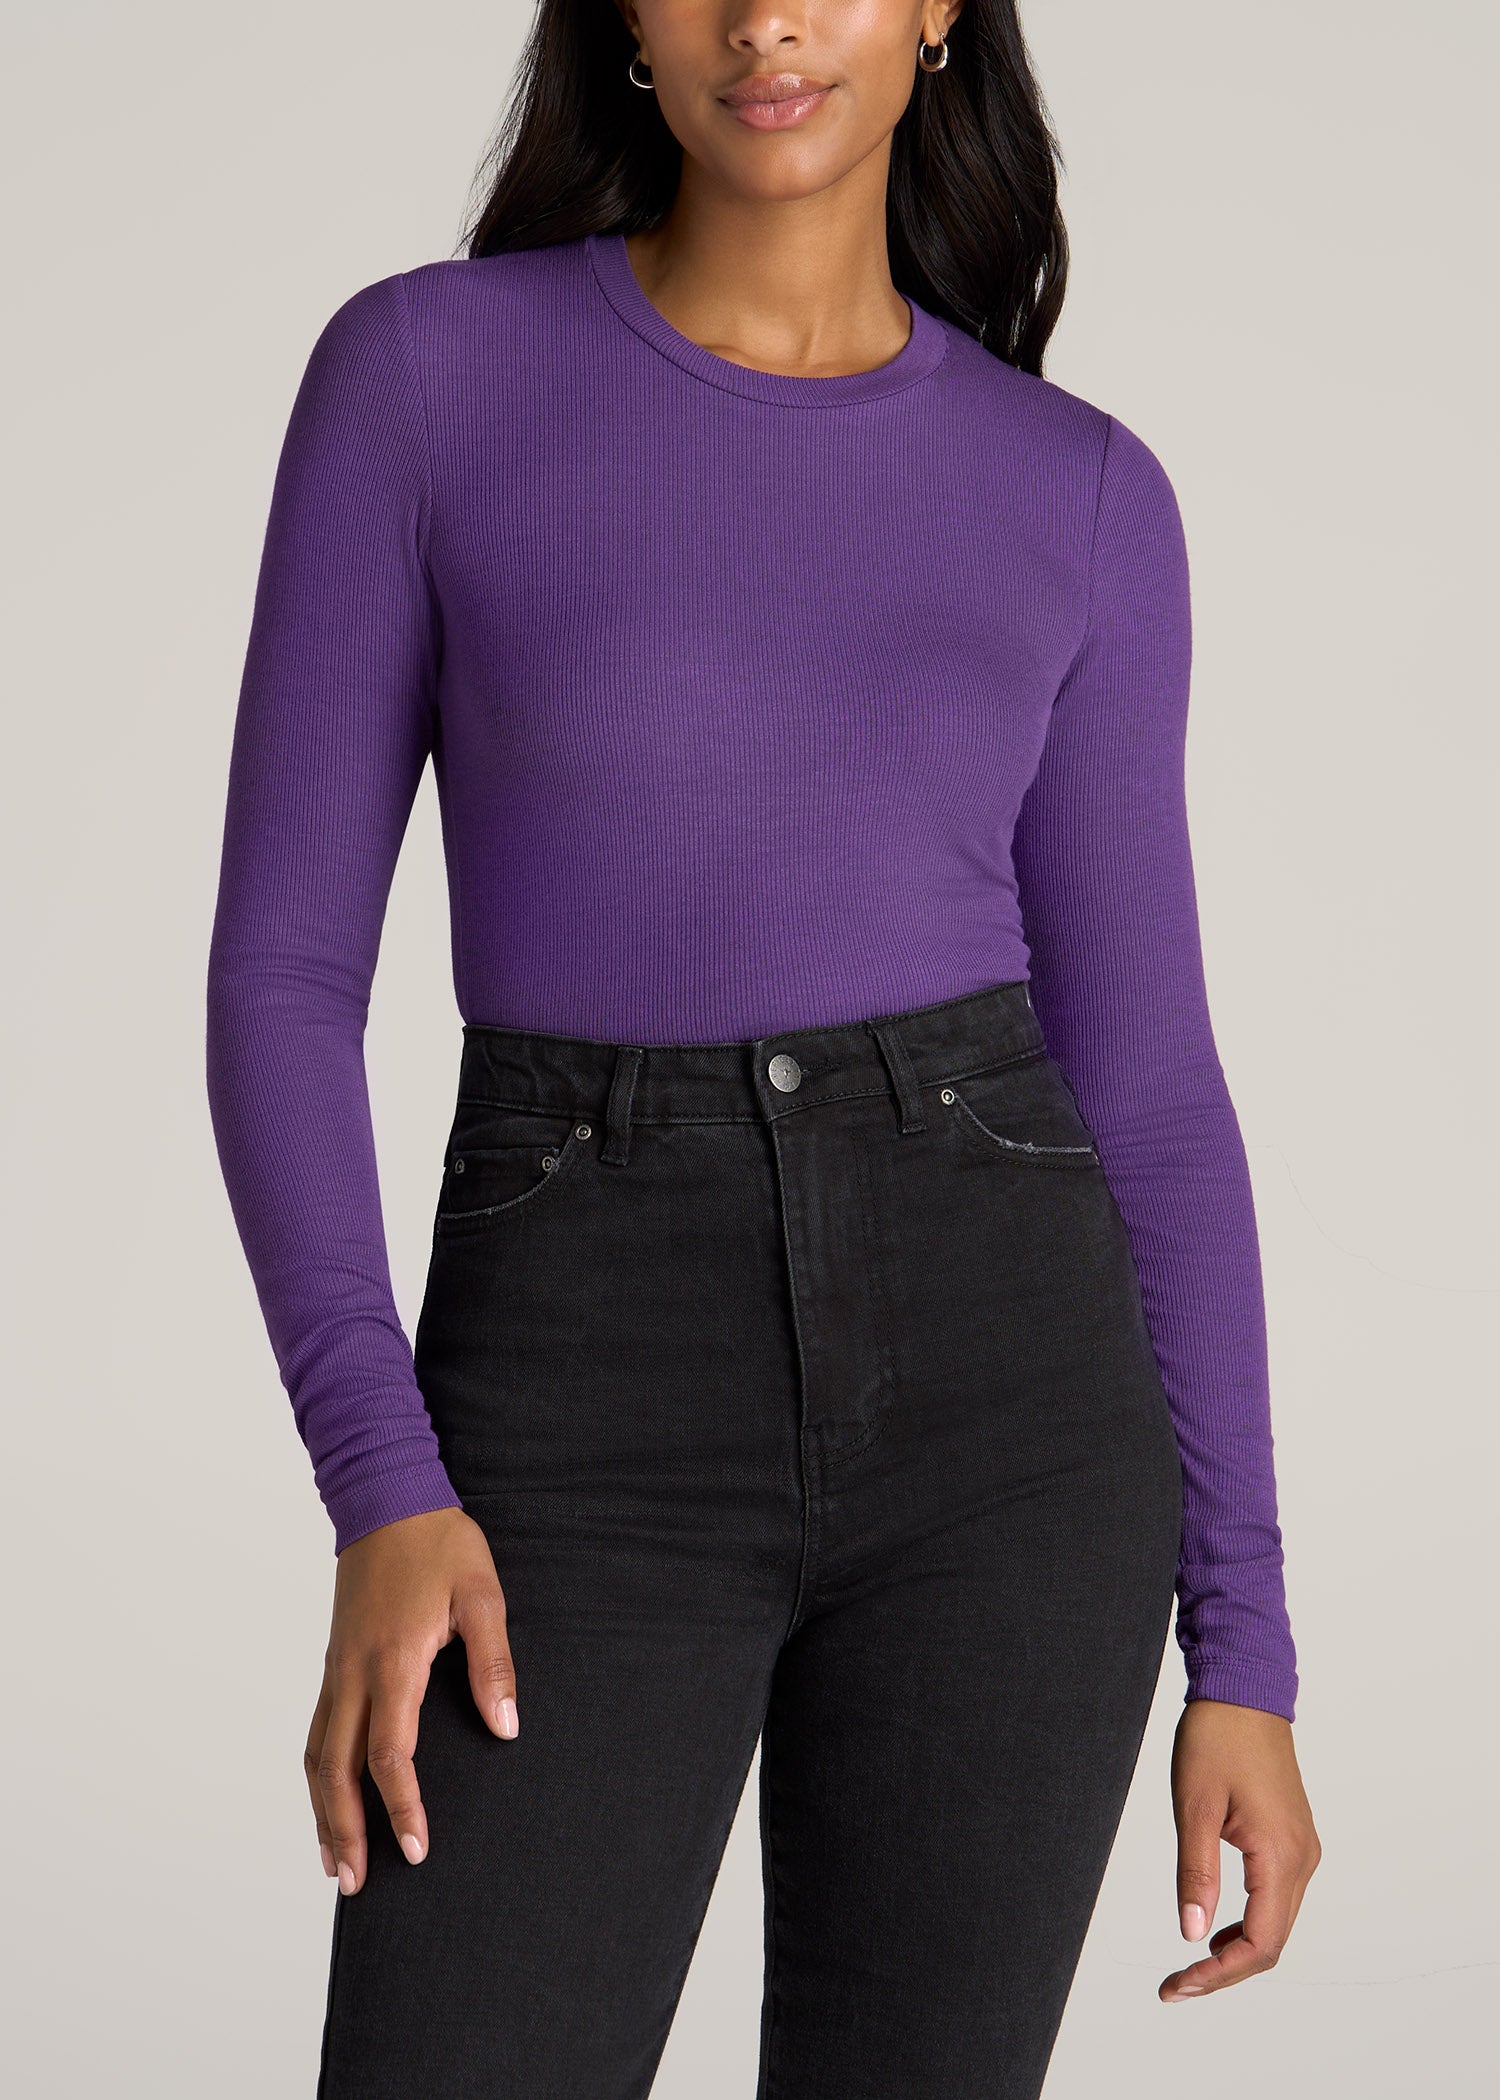 Fitted Ribbed Long Sleeve Tall Women's Shirt | American Tall